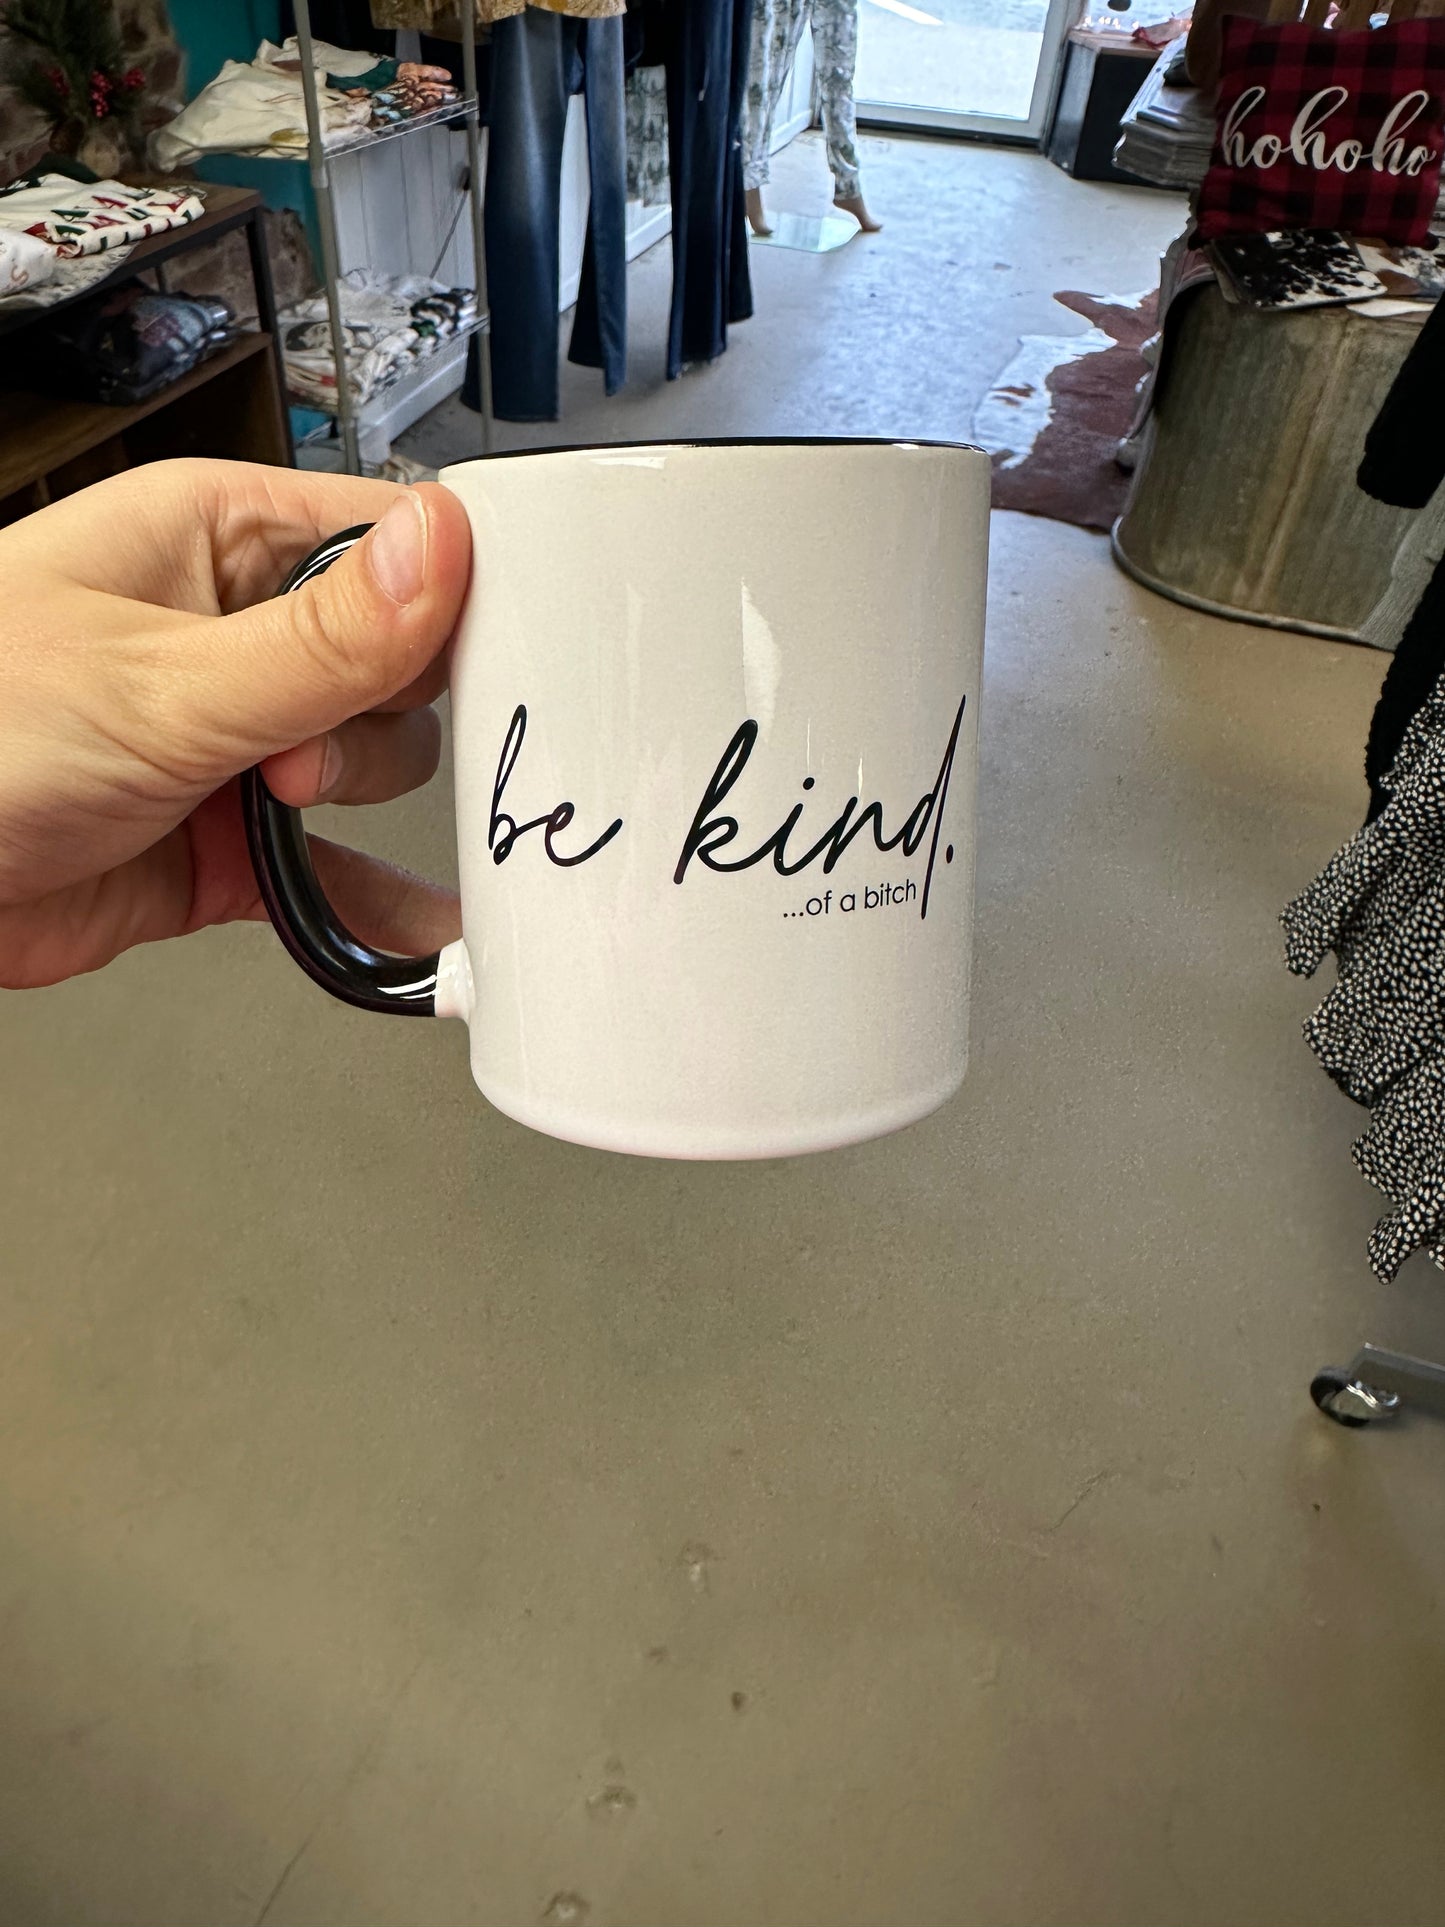 Quirky Mugs